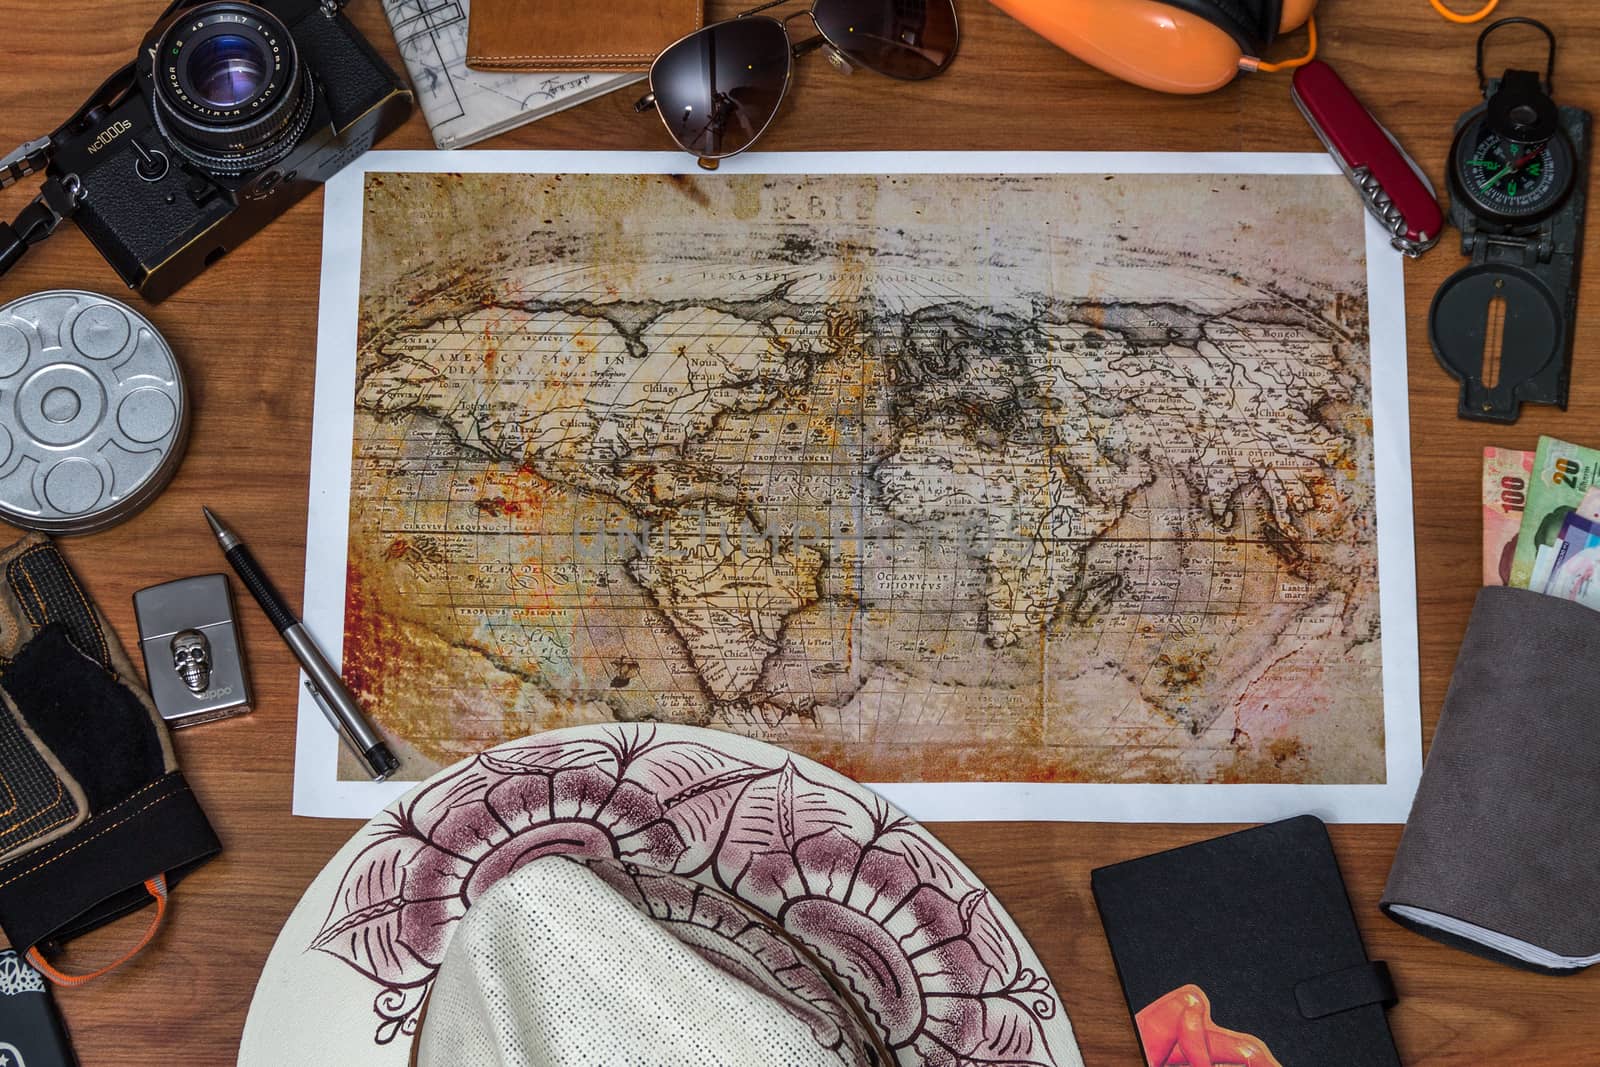 Man planning vacation using world map and compass along with other travel accessories. Tourist wearing brown hat looking at the world map